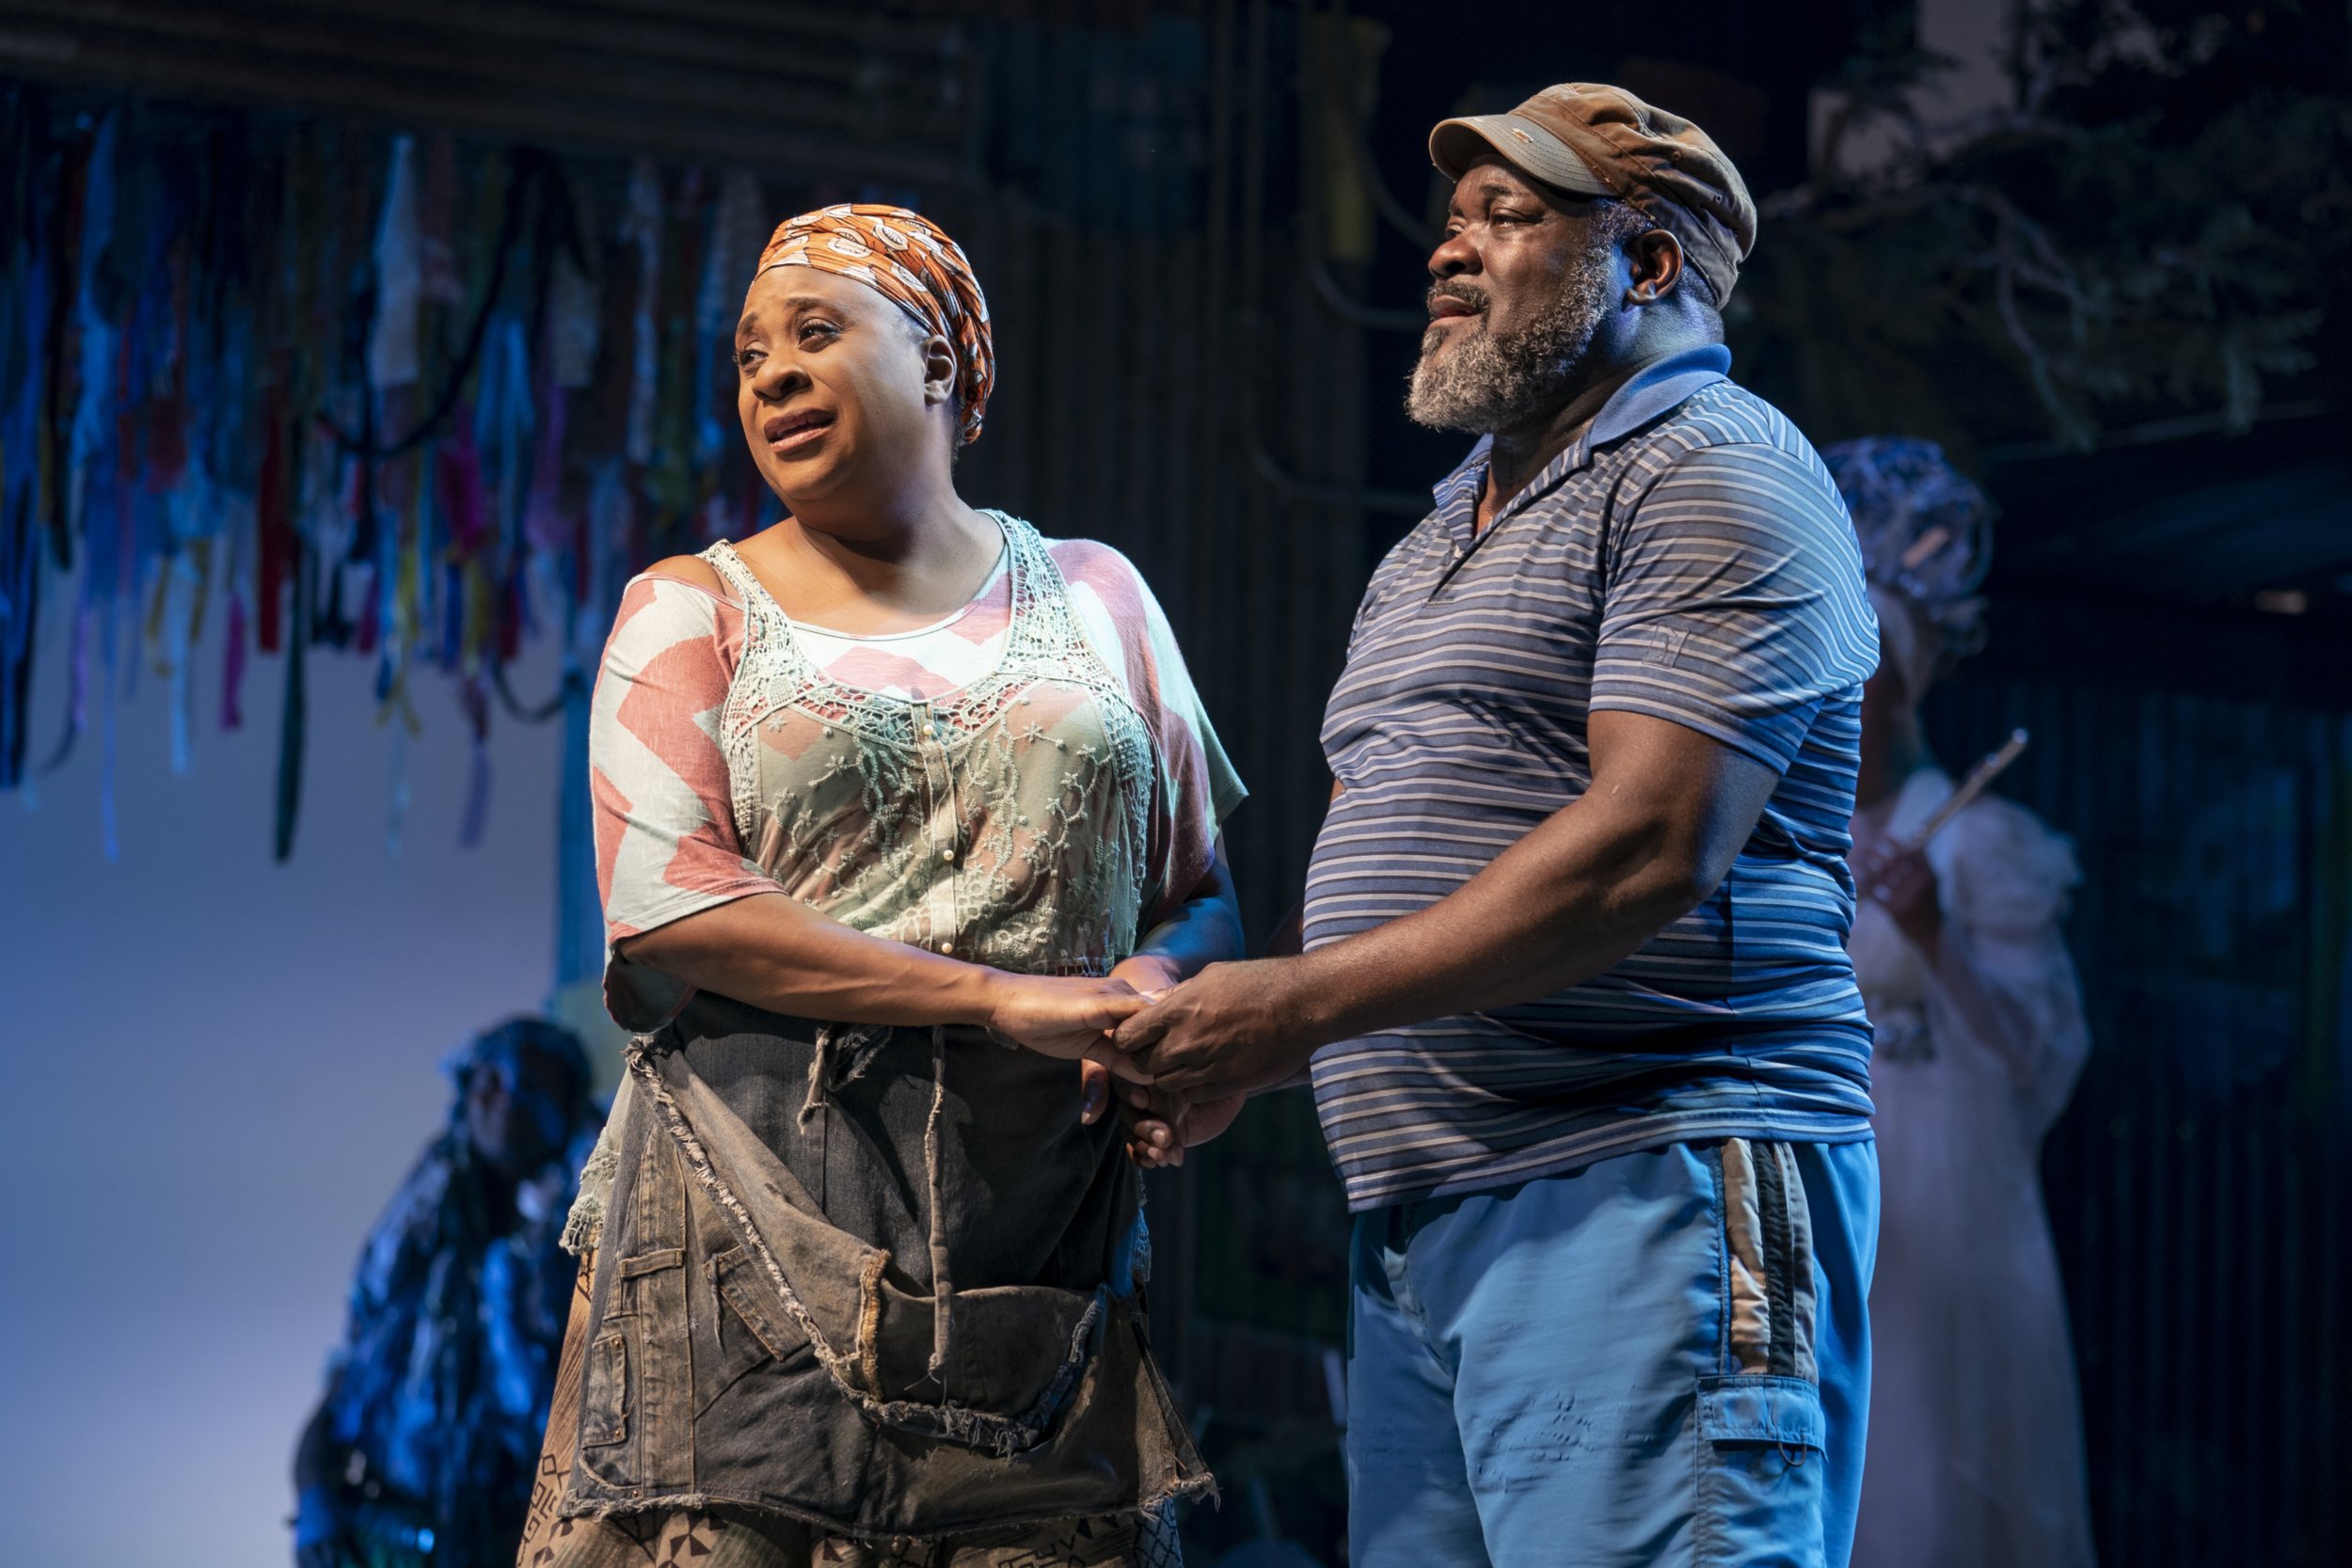 Danielle-Lee-Greaves-as-Mama-Euralie-and-Phillip-Boykin-as-Tonton-Julian-in-the-North-American-Tour-of-ONCE-ON-THIS-ISLAND.-Photo-by-Joan-Marcus.-2019-scaled.jpg